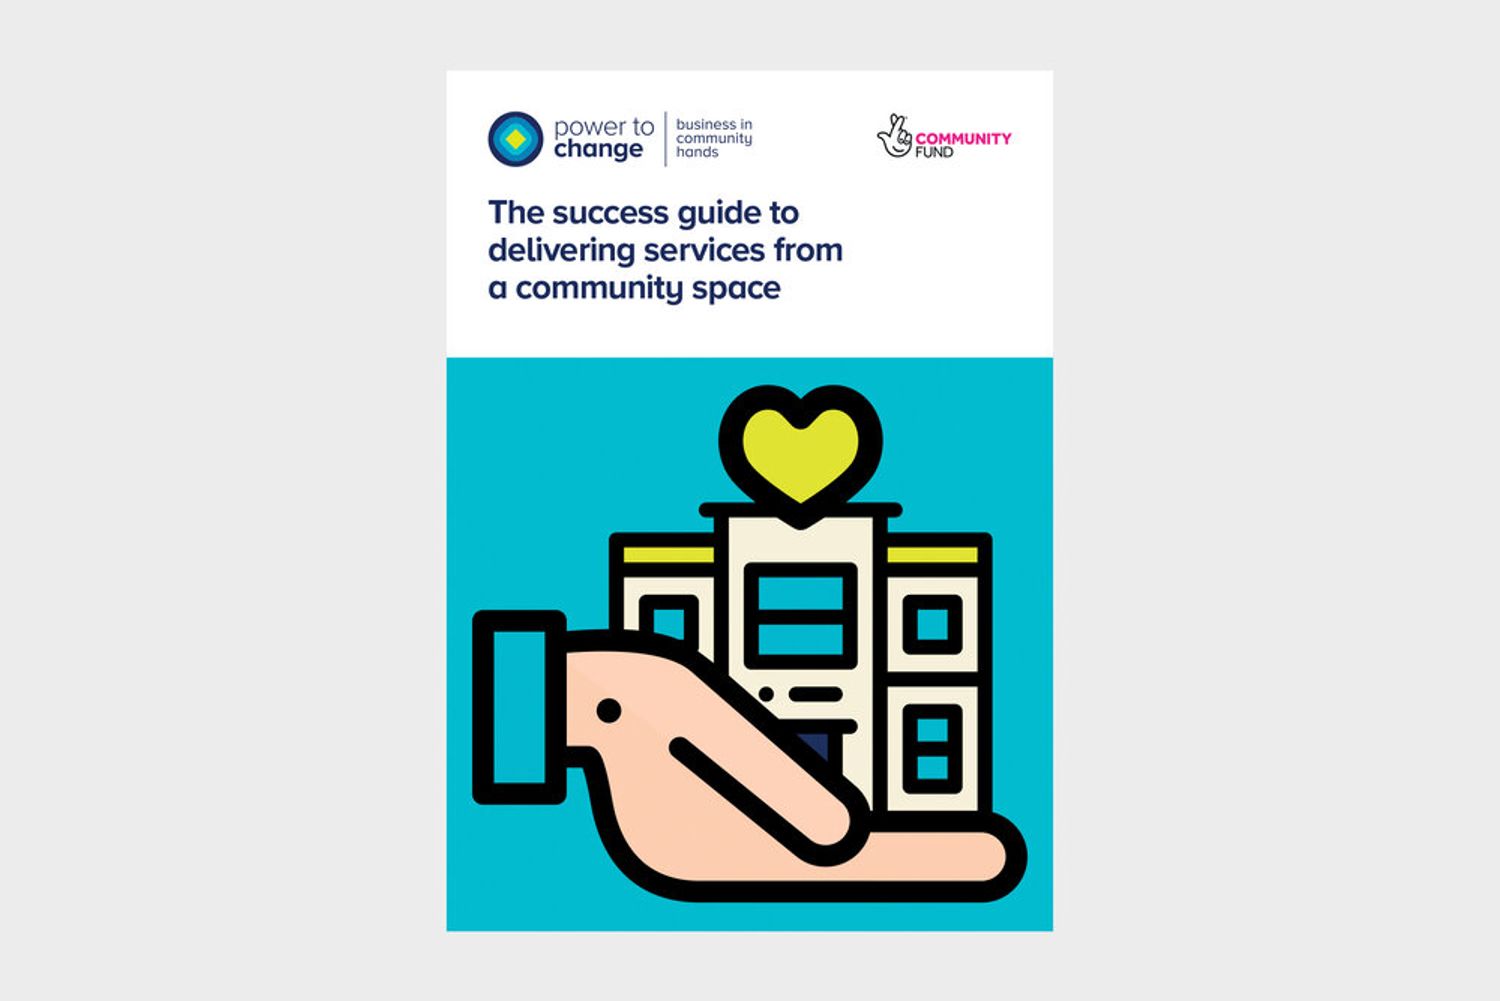 image for article: Community Business Success Guide - Service delivery from a Community Space